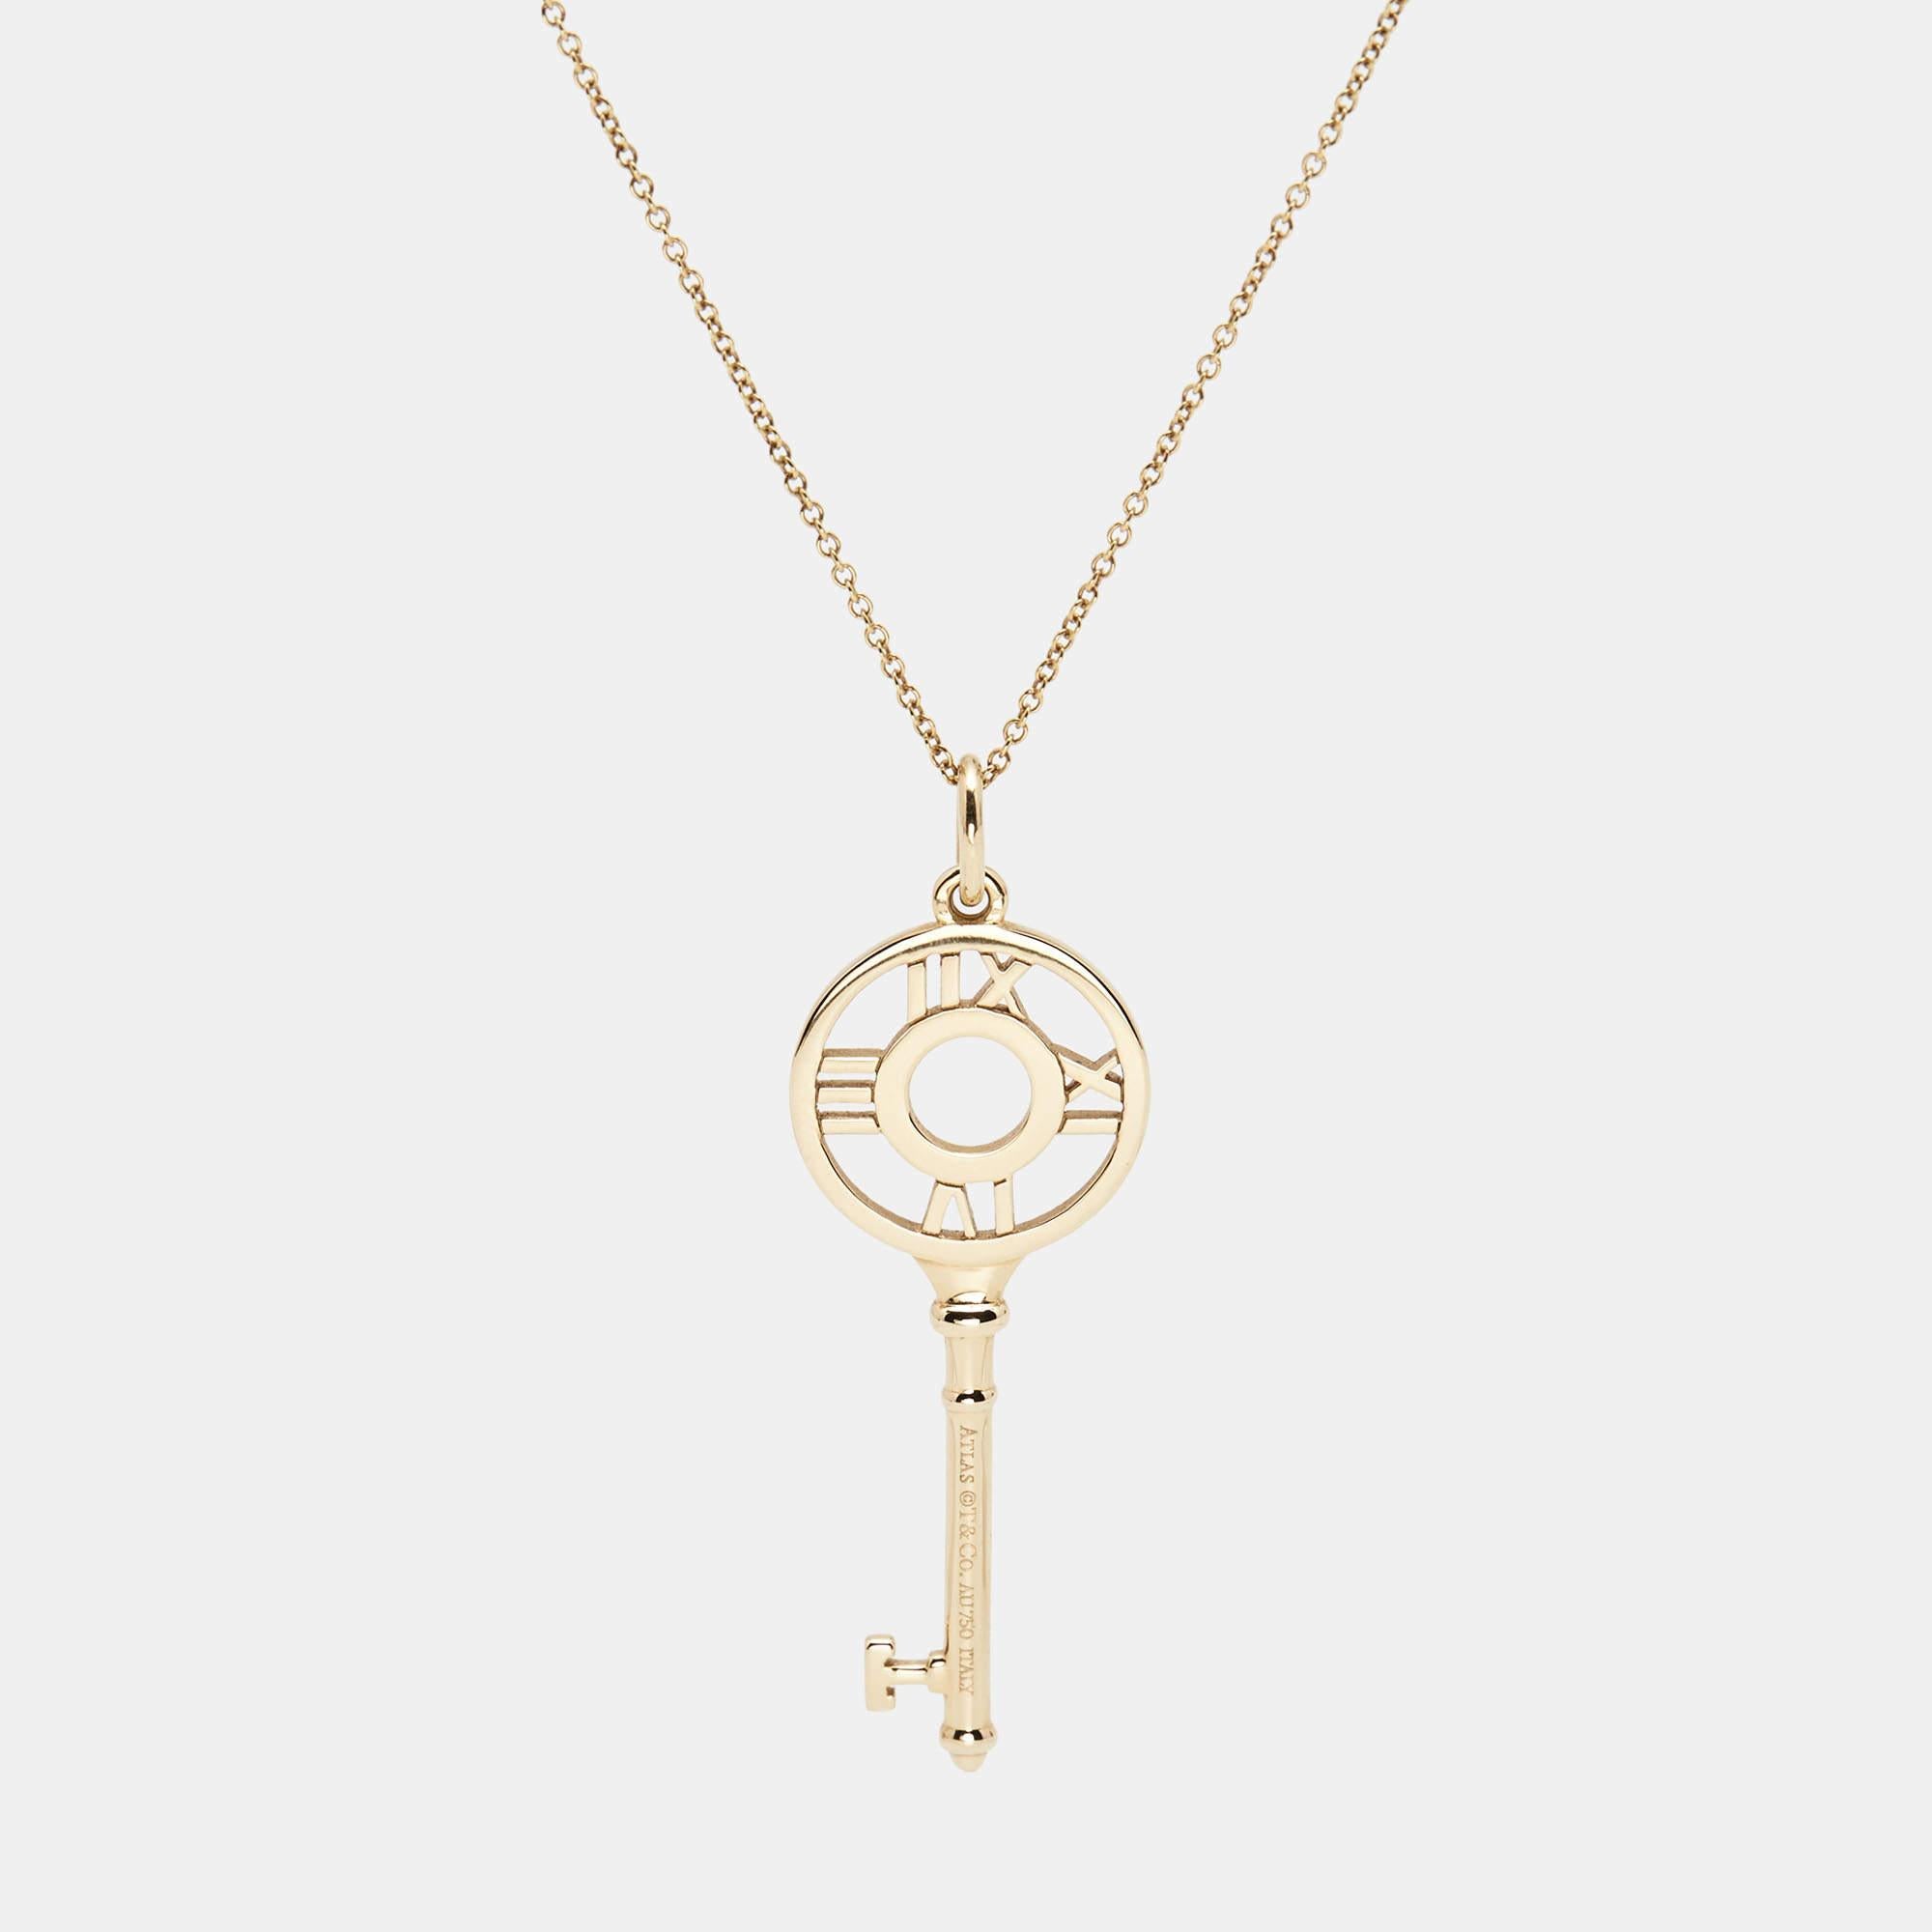 An elegant design from Tiffany & Co., this necklace features a delicate gold chain secured by a spring-ring clasp. The Tiffany key, with signature Roman numerals from the Atlas collection, forms the pendant. Diamonds give it a luxurious